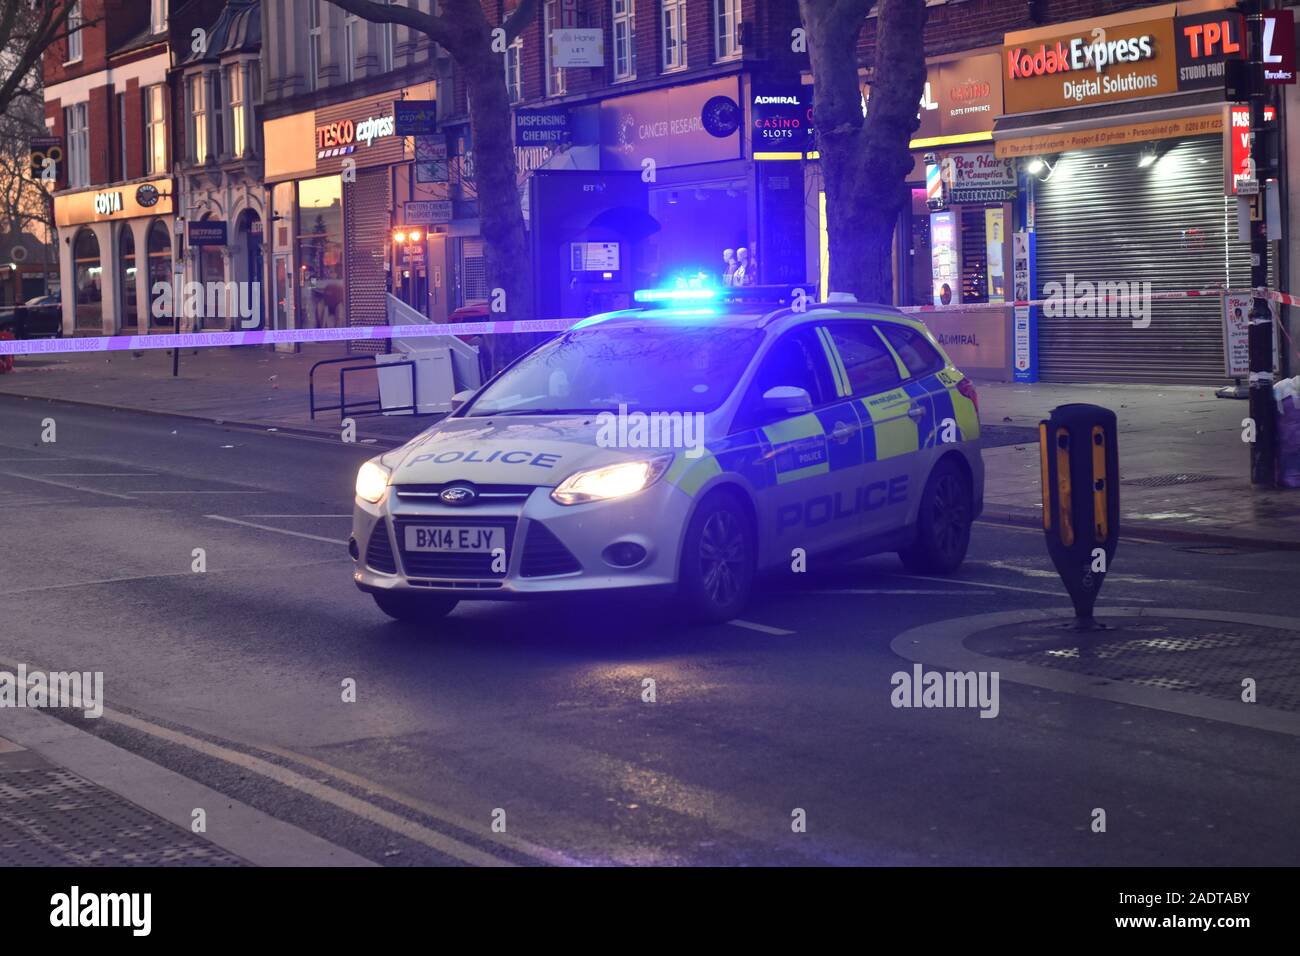 A shooting took place on Woodgreen High street late last night. One male was hit during the shooting and was rushed to a North London hospital in the early hours of the morning said to be in a life threatening condition. The victim was managed to move across the road after being shot to safety where help could soon arrive to assist. Due to this move from one side of the street to the other the whole road had to be closed and traffic redirected as the majority of Woodgreen High Street taped off to in order to preserve the crime scene. Stock Photo